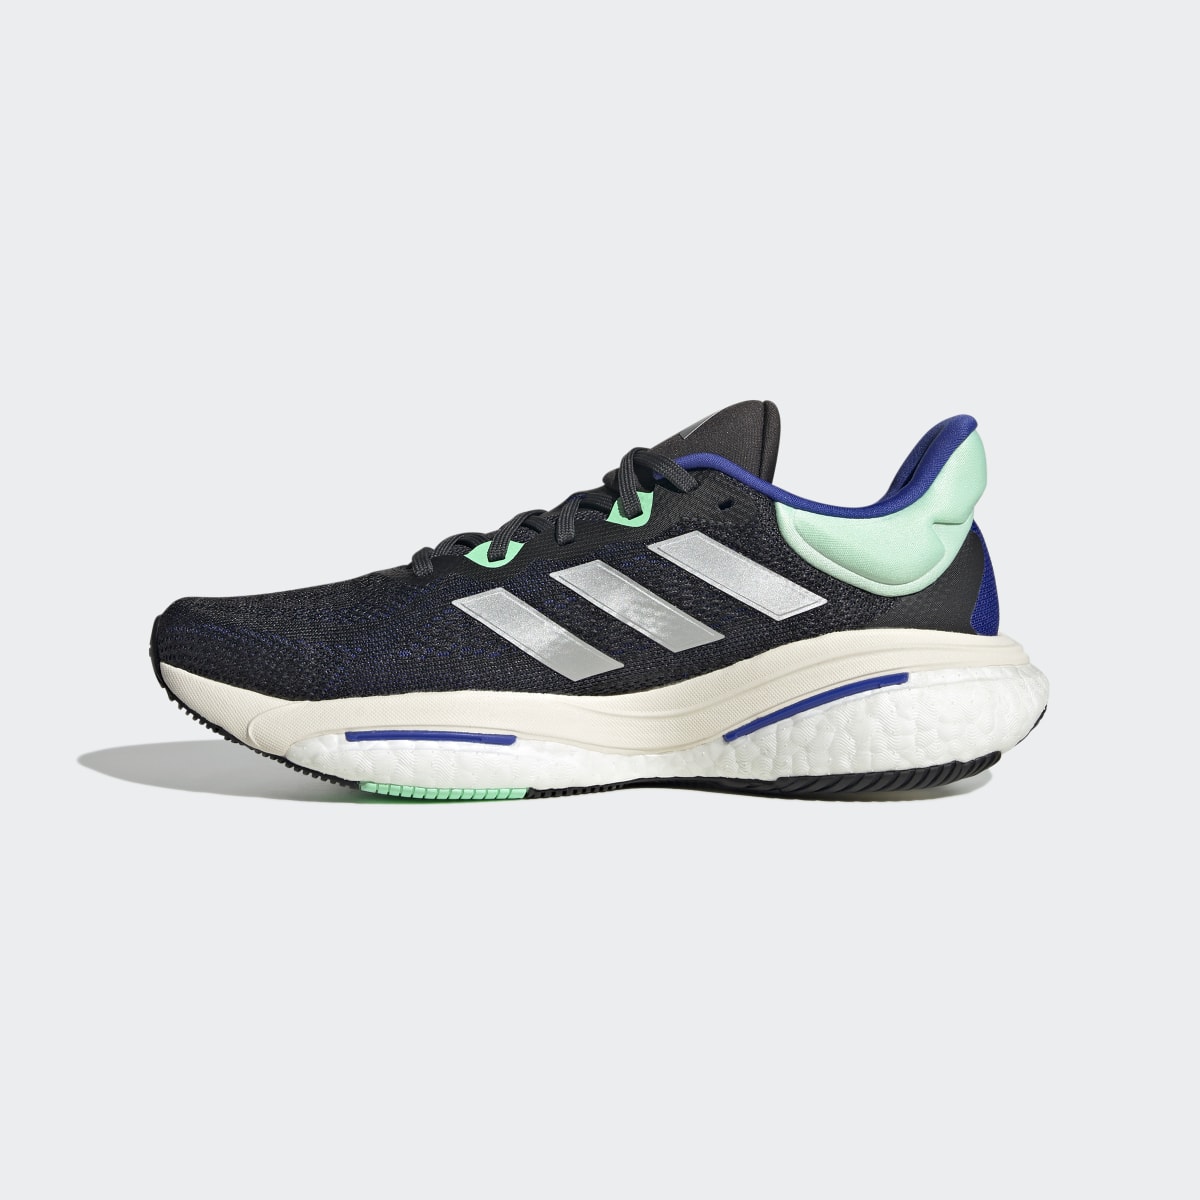 Adidas Solarglide 6 Running Shoes. 7